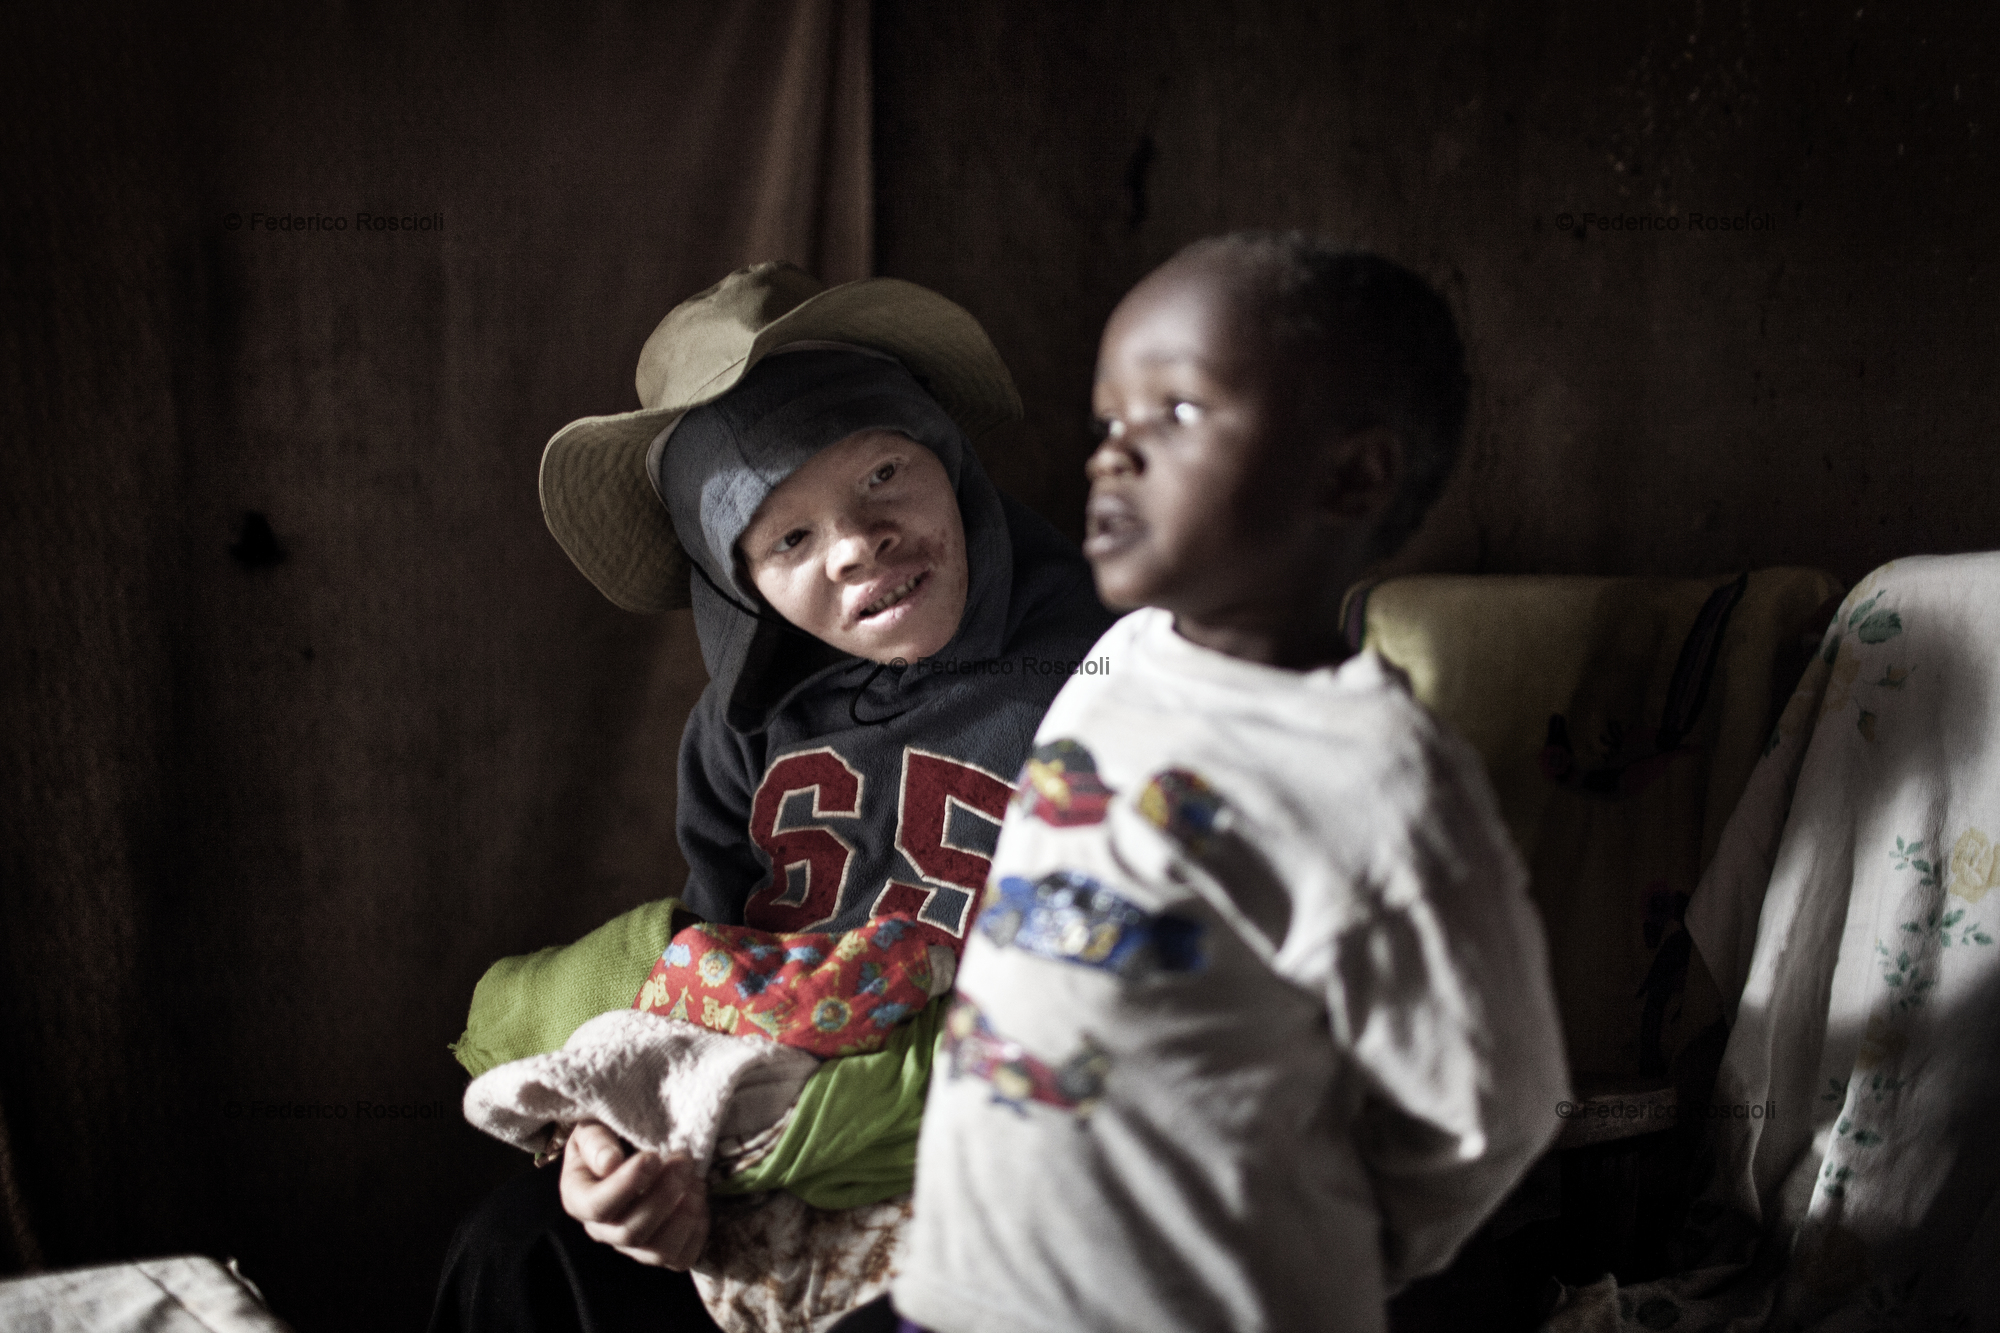 Ilula, Tanzania, July 21, 2014 - Angela with one of her four children, none of them with albinism. She is one of the persons with albinism of the Kilolo District censed by Tulime Association. There have never been killings in this area, so the first enemy of albinos is the sun. The census was fundamental in order to be able to help the albinos of the area with sunscreen cream and medical check-up. The national census does not provide correct and actual data about albinism.